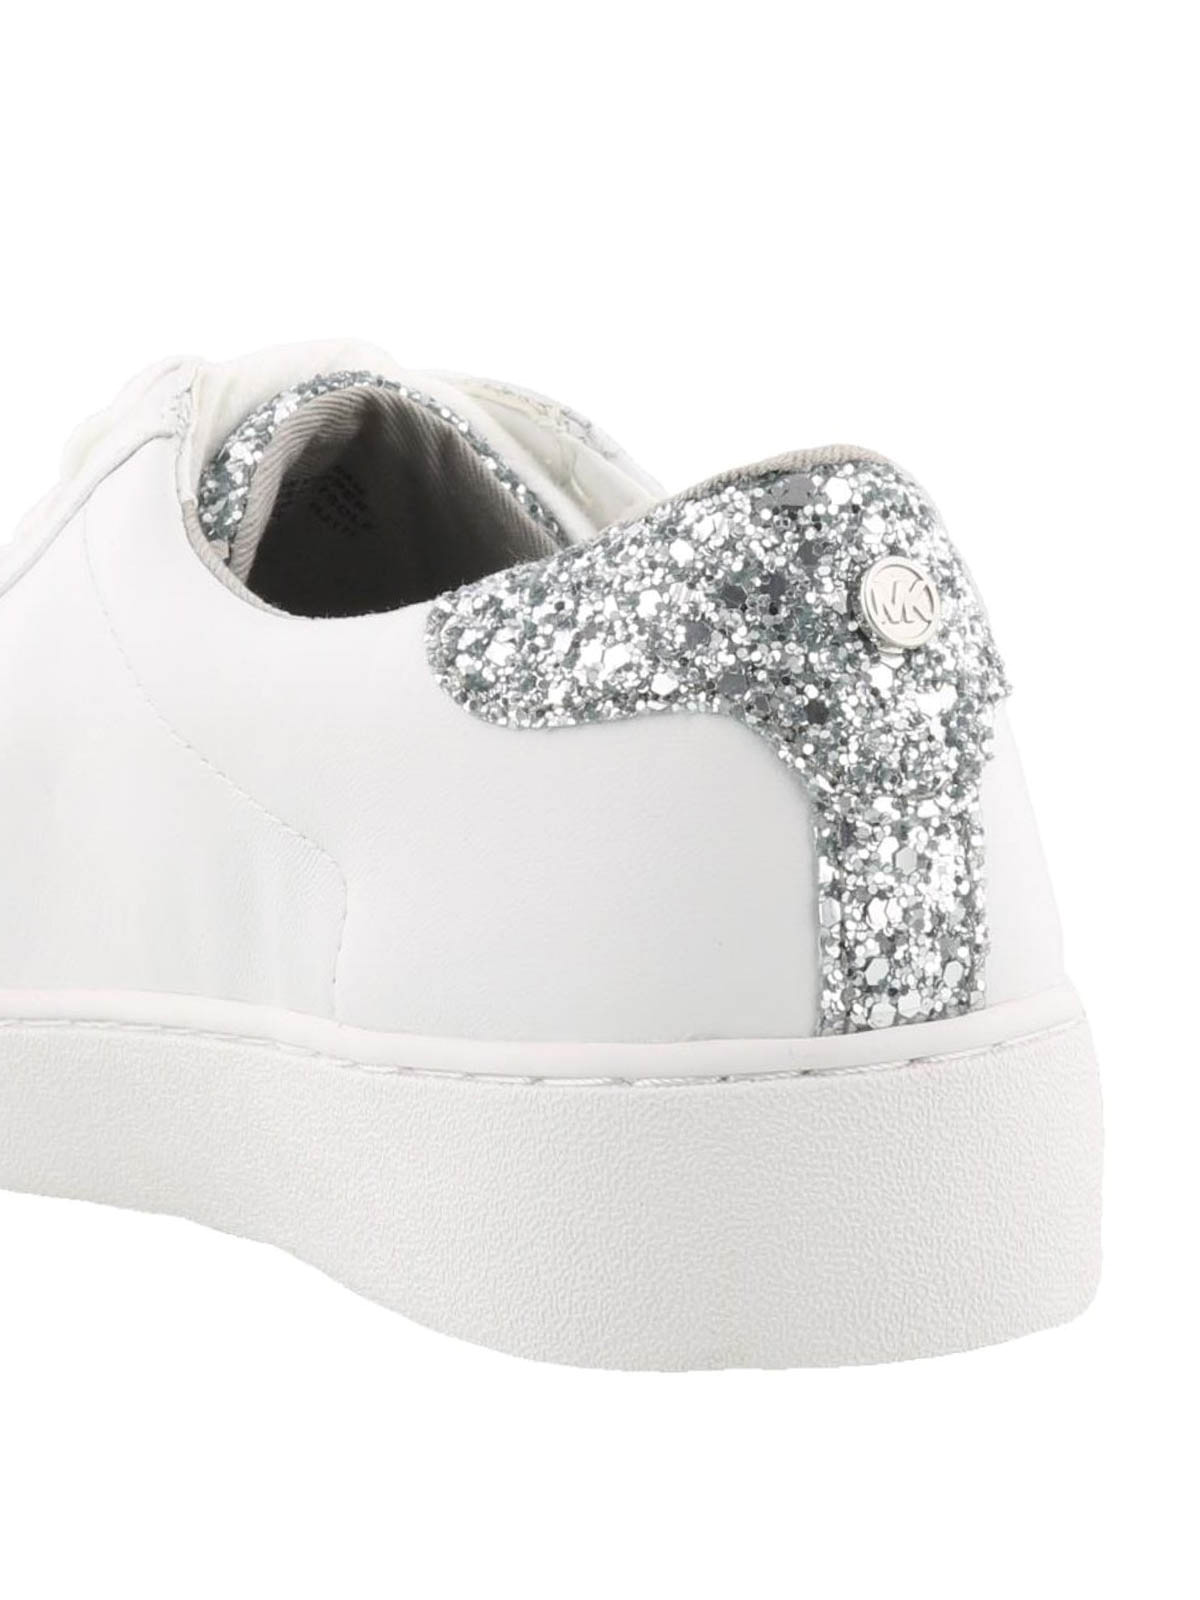 Trainers Michael Kors - Irving glittered leather sneakers - 43S6IRFS1L898